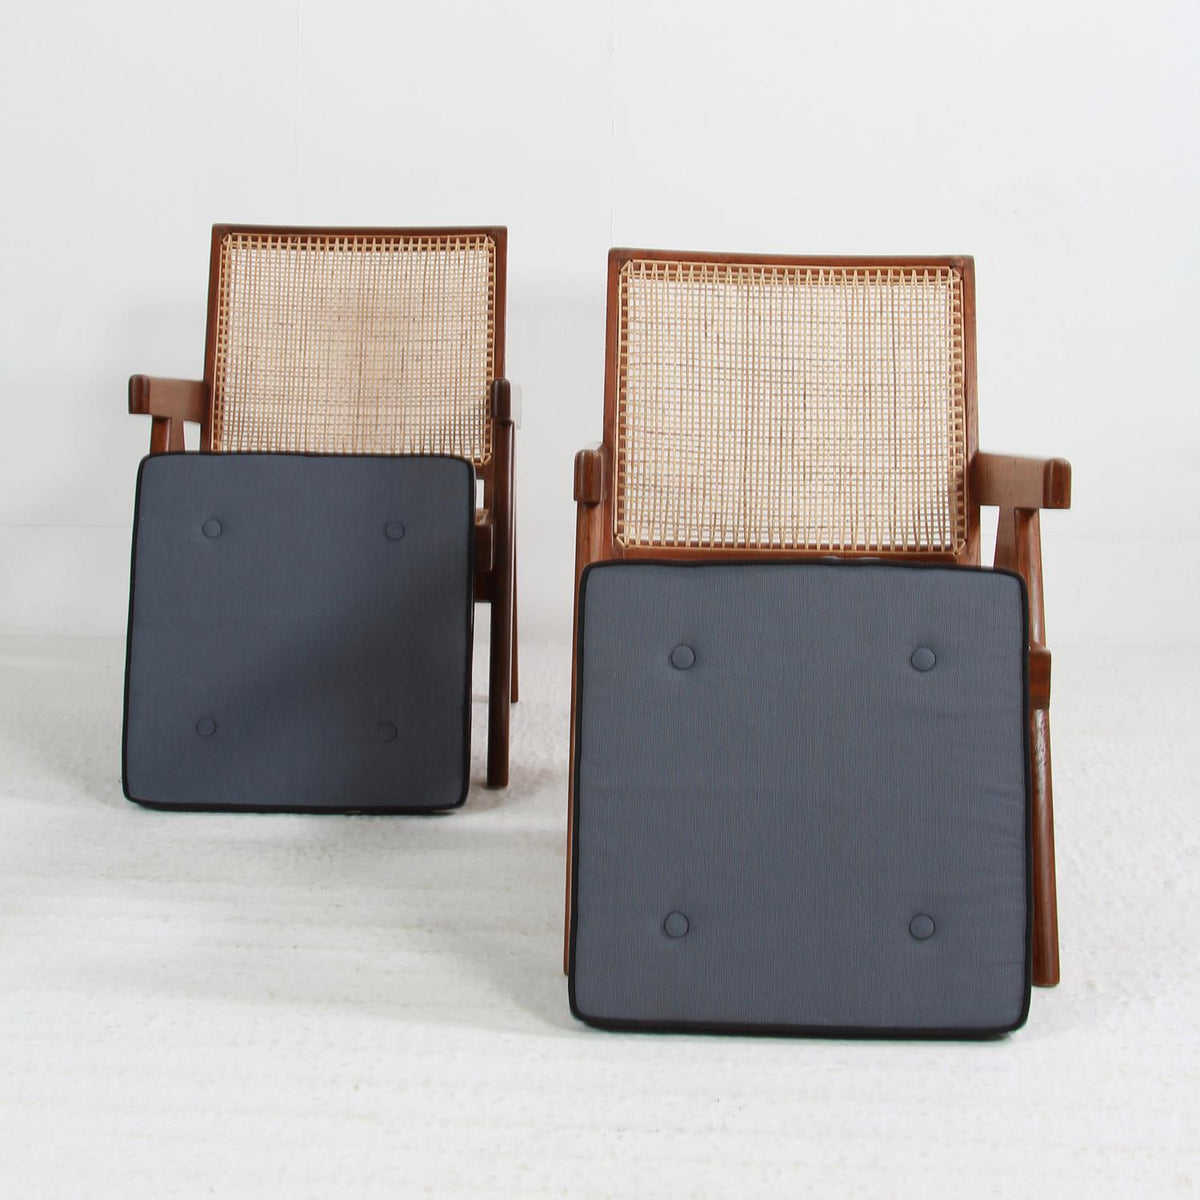 Rare Pair of Pierre Jeanneret Mid-Century Easy Chairs in Teak